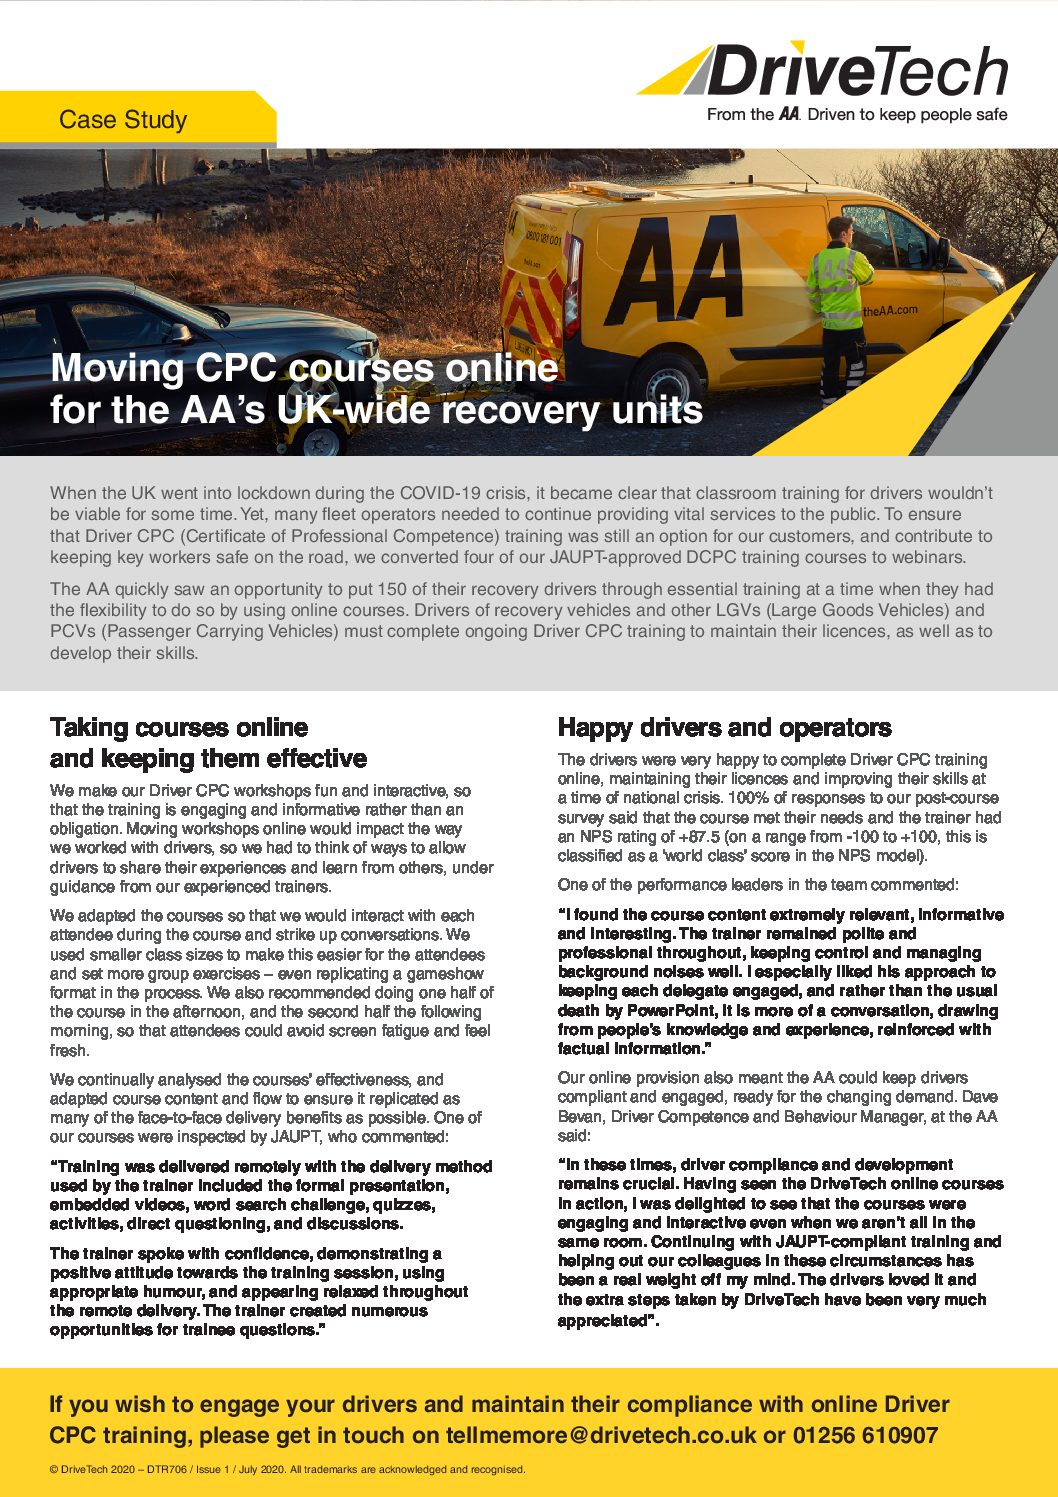 The AA Case Study – Online CPC Courses